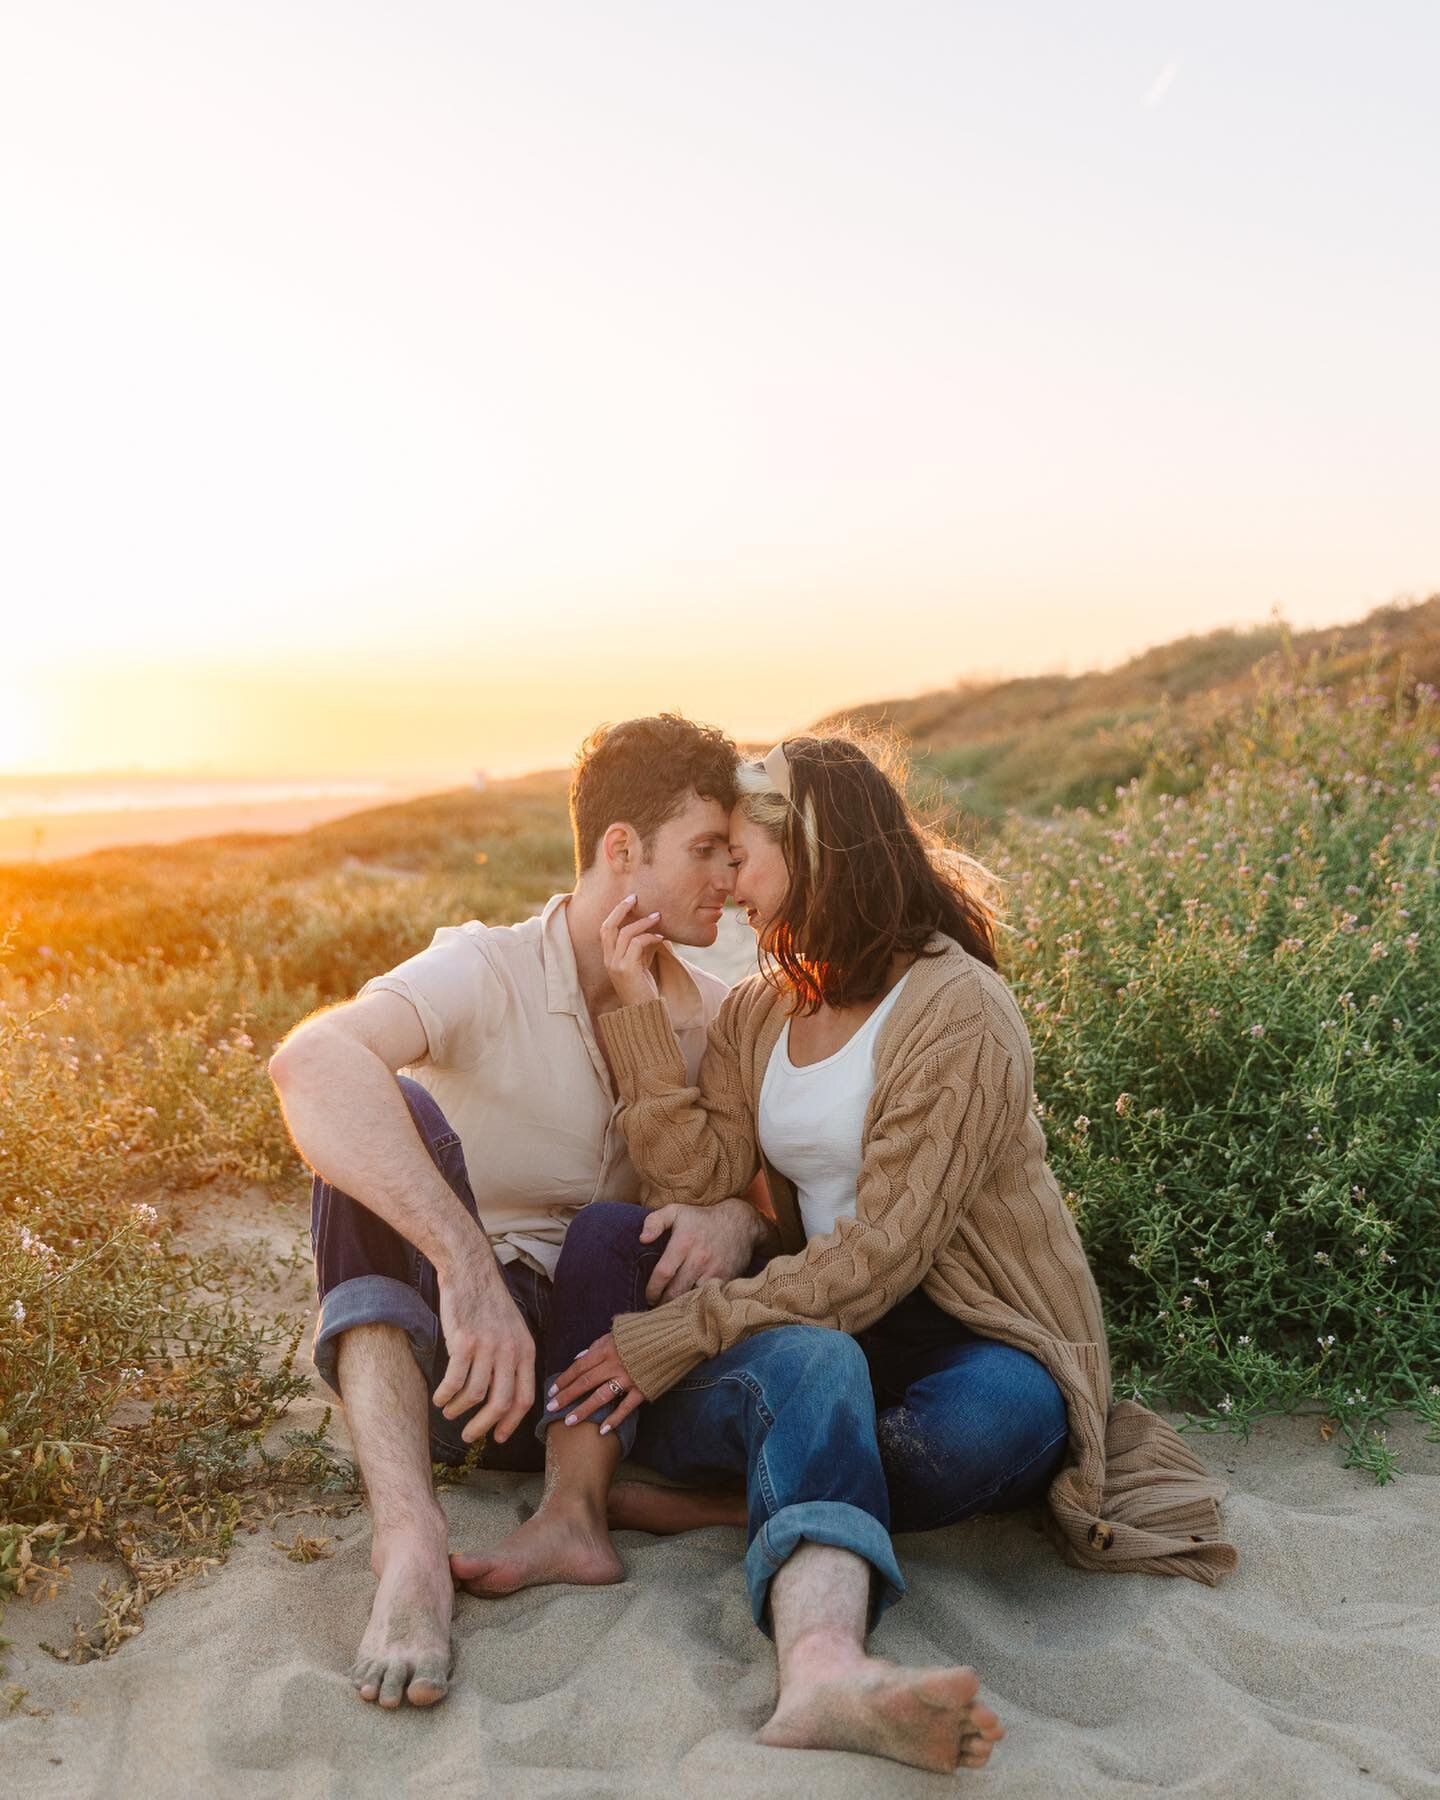 Counting down the days until these two get married&hellip;. Saturday can&rsquo;t come soon enough! 🎉🤍💍 

#socalphotographer #socalweddingphotographer #huntingtonbeach #ocphotographer #ocweddingphotographer #couplephotoshoot #socalwedding